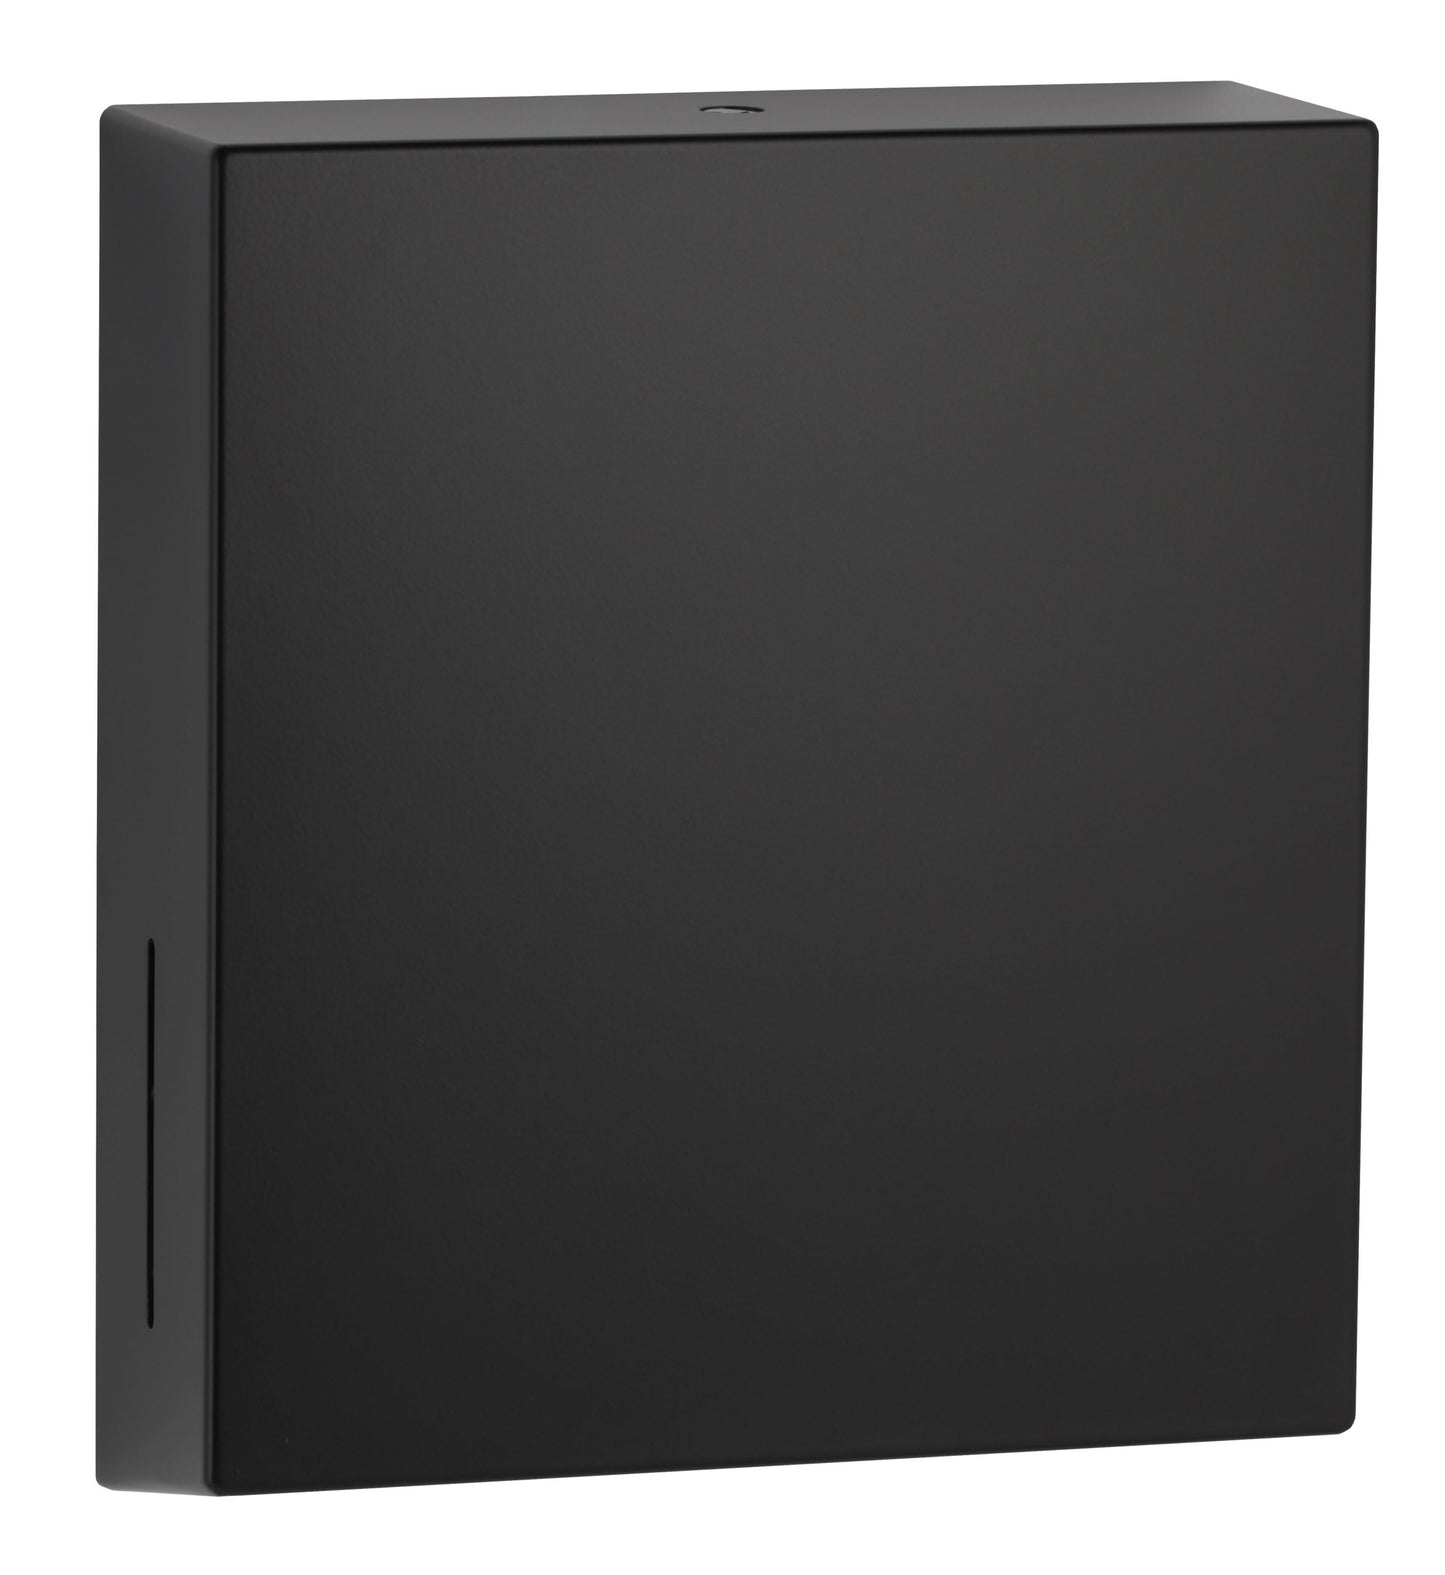 The Bobrick B-9262 is one of our surface-mounted paper towel holders in stainless steel in a matte black finish.